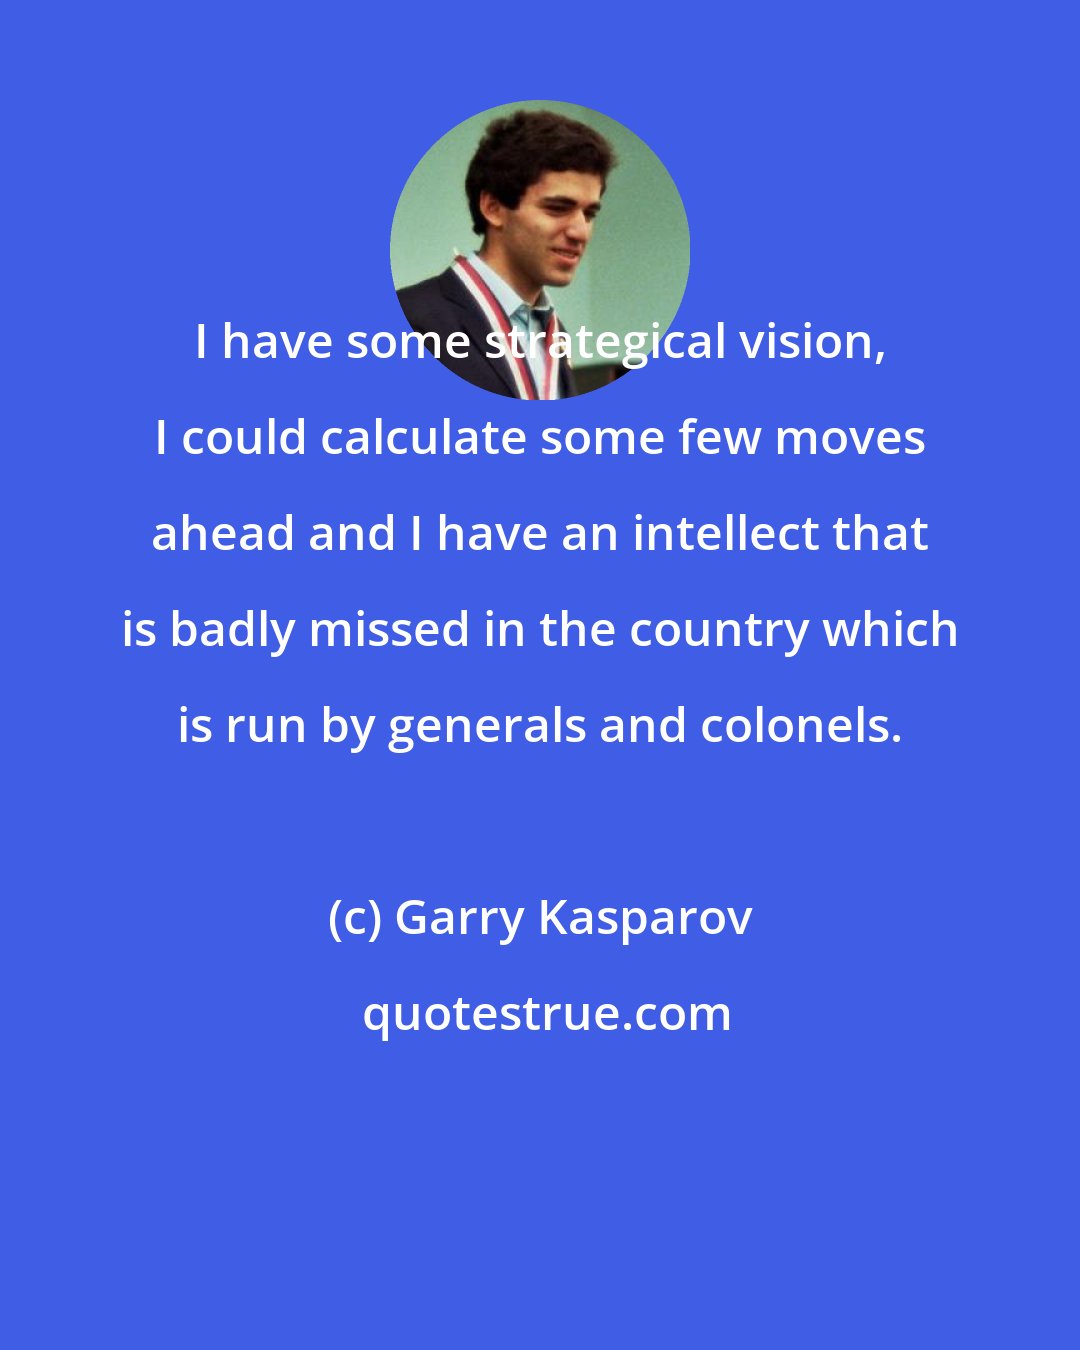 Garry Kasparov: I have some strategical vision, I could calculate some few moves ahead and I have an intellect that is badly missed in the country which is run by generals and colonels.